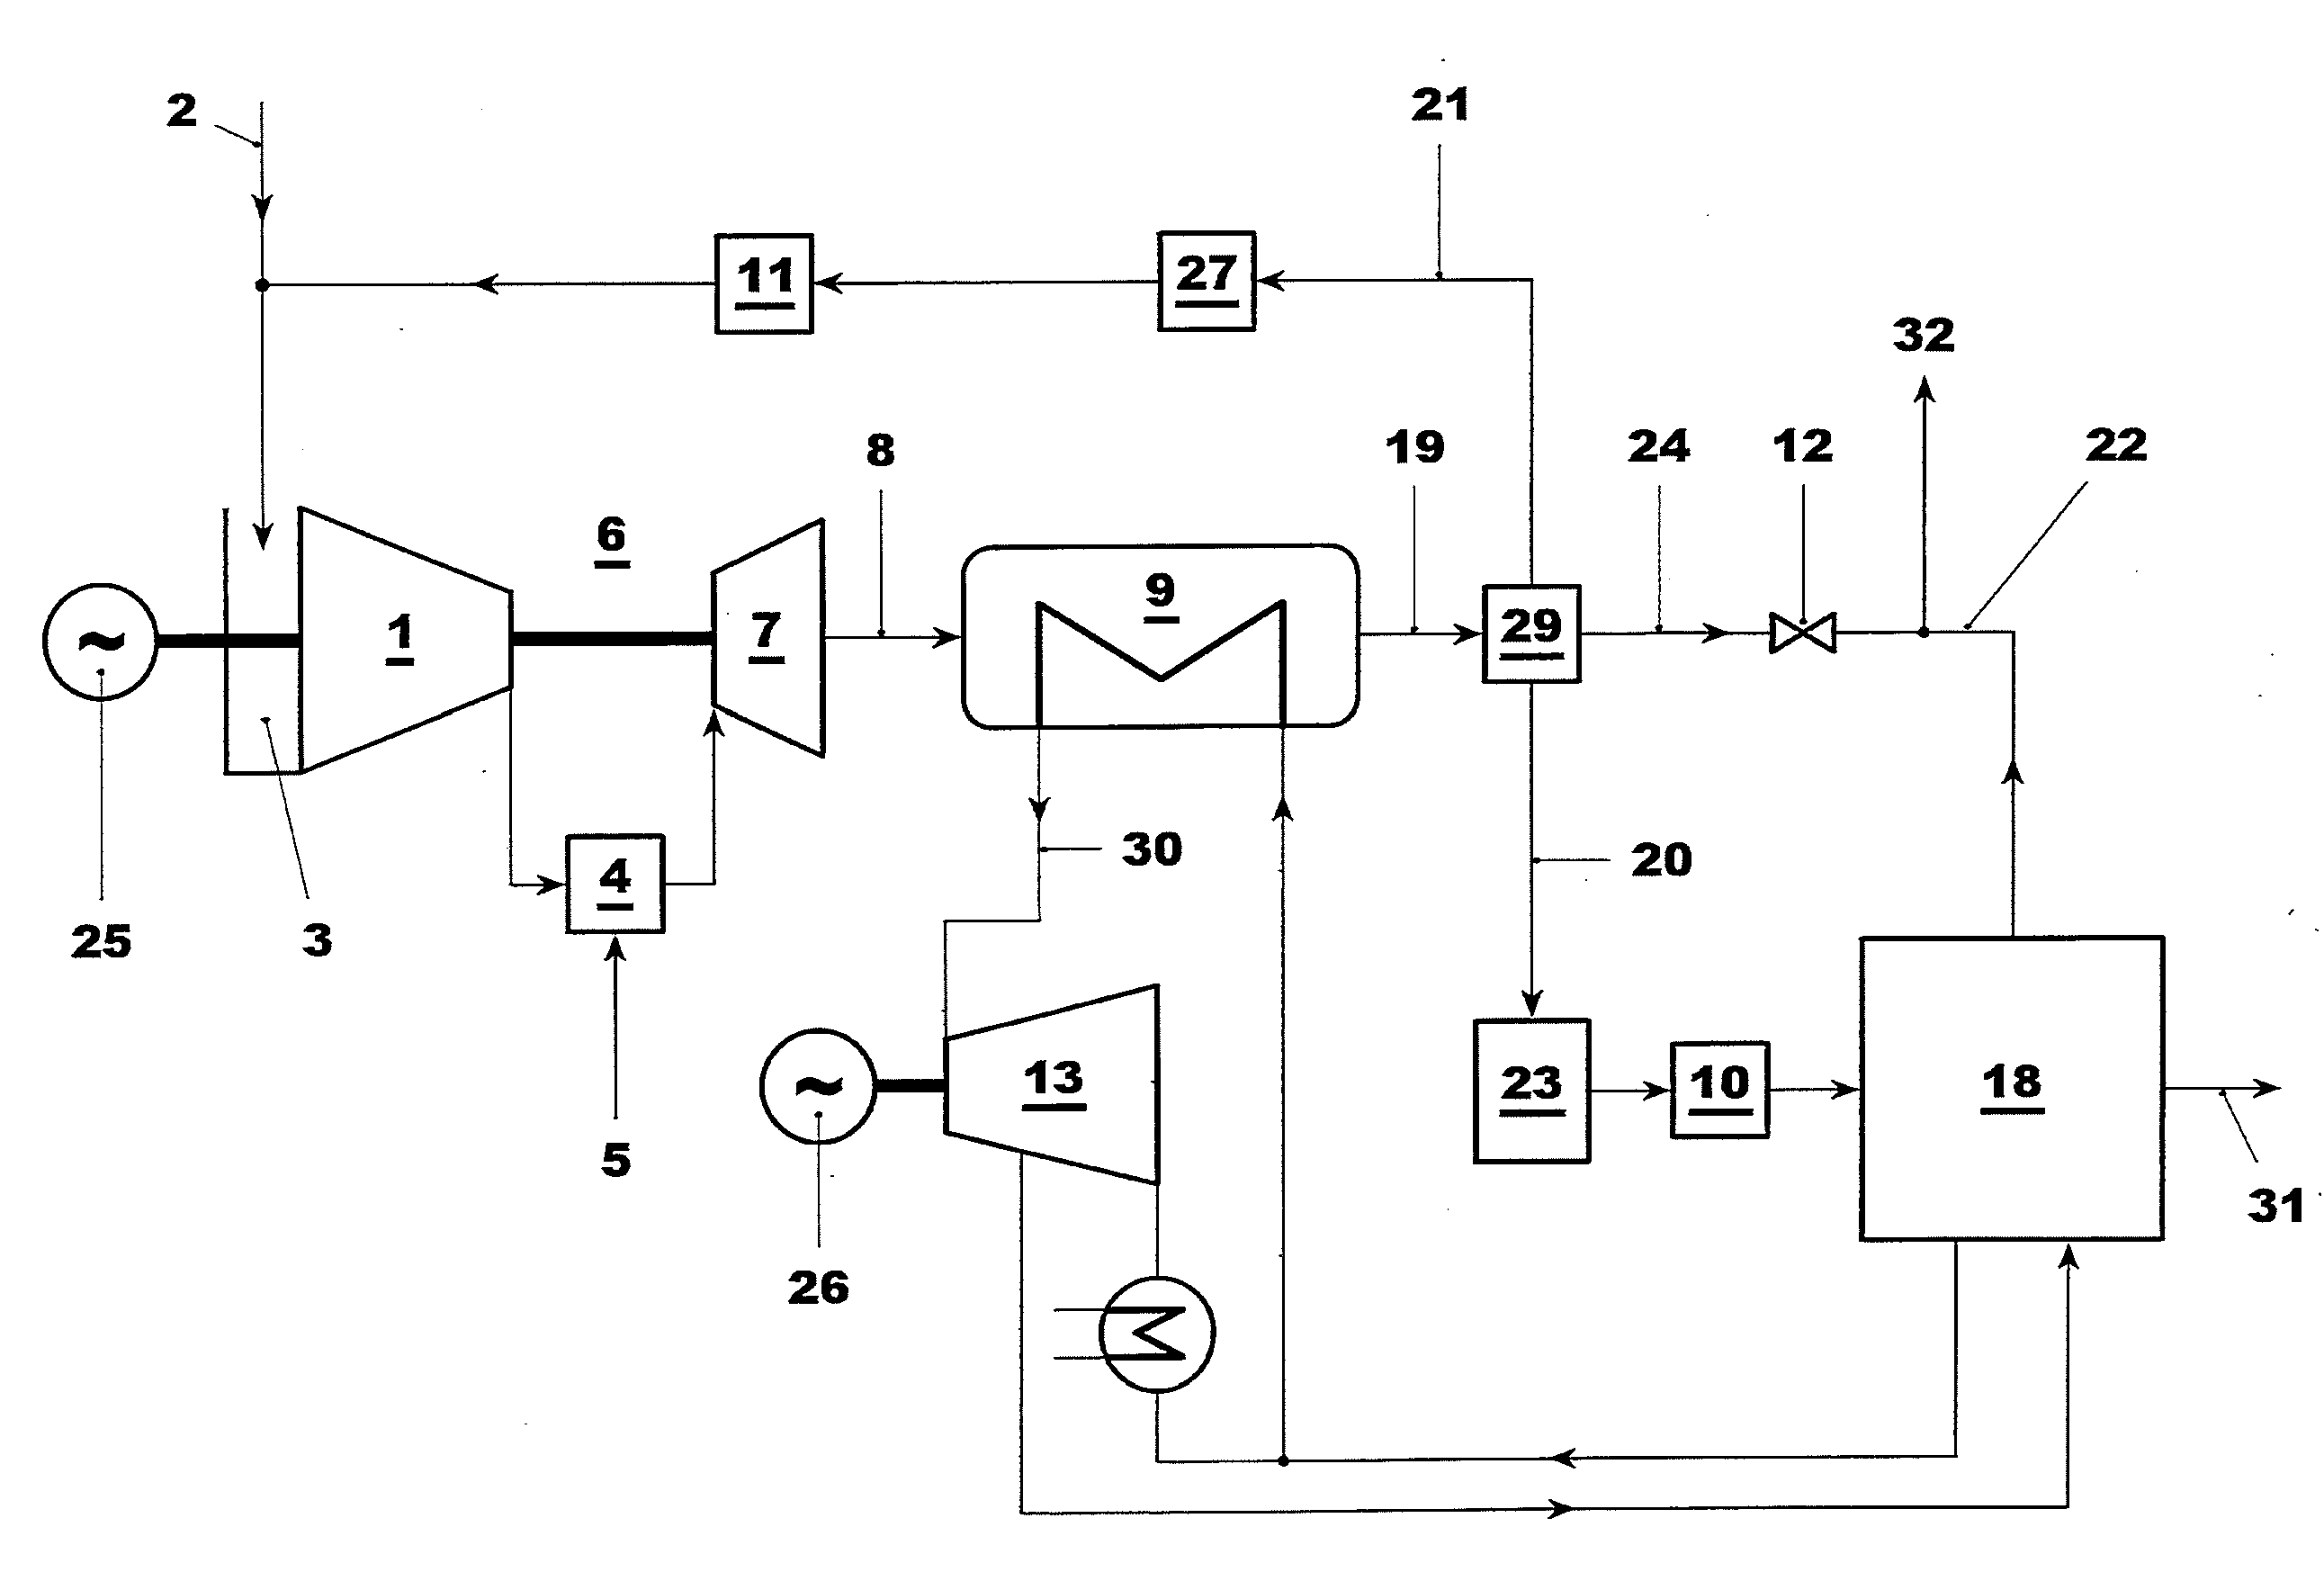 Gas turbine power plant with flue gas recirculation and oxygen-depleted cooling gas